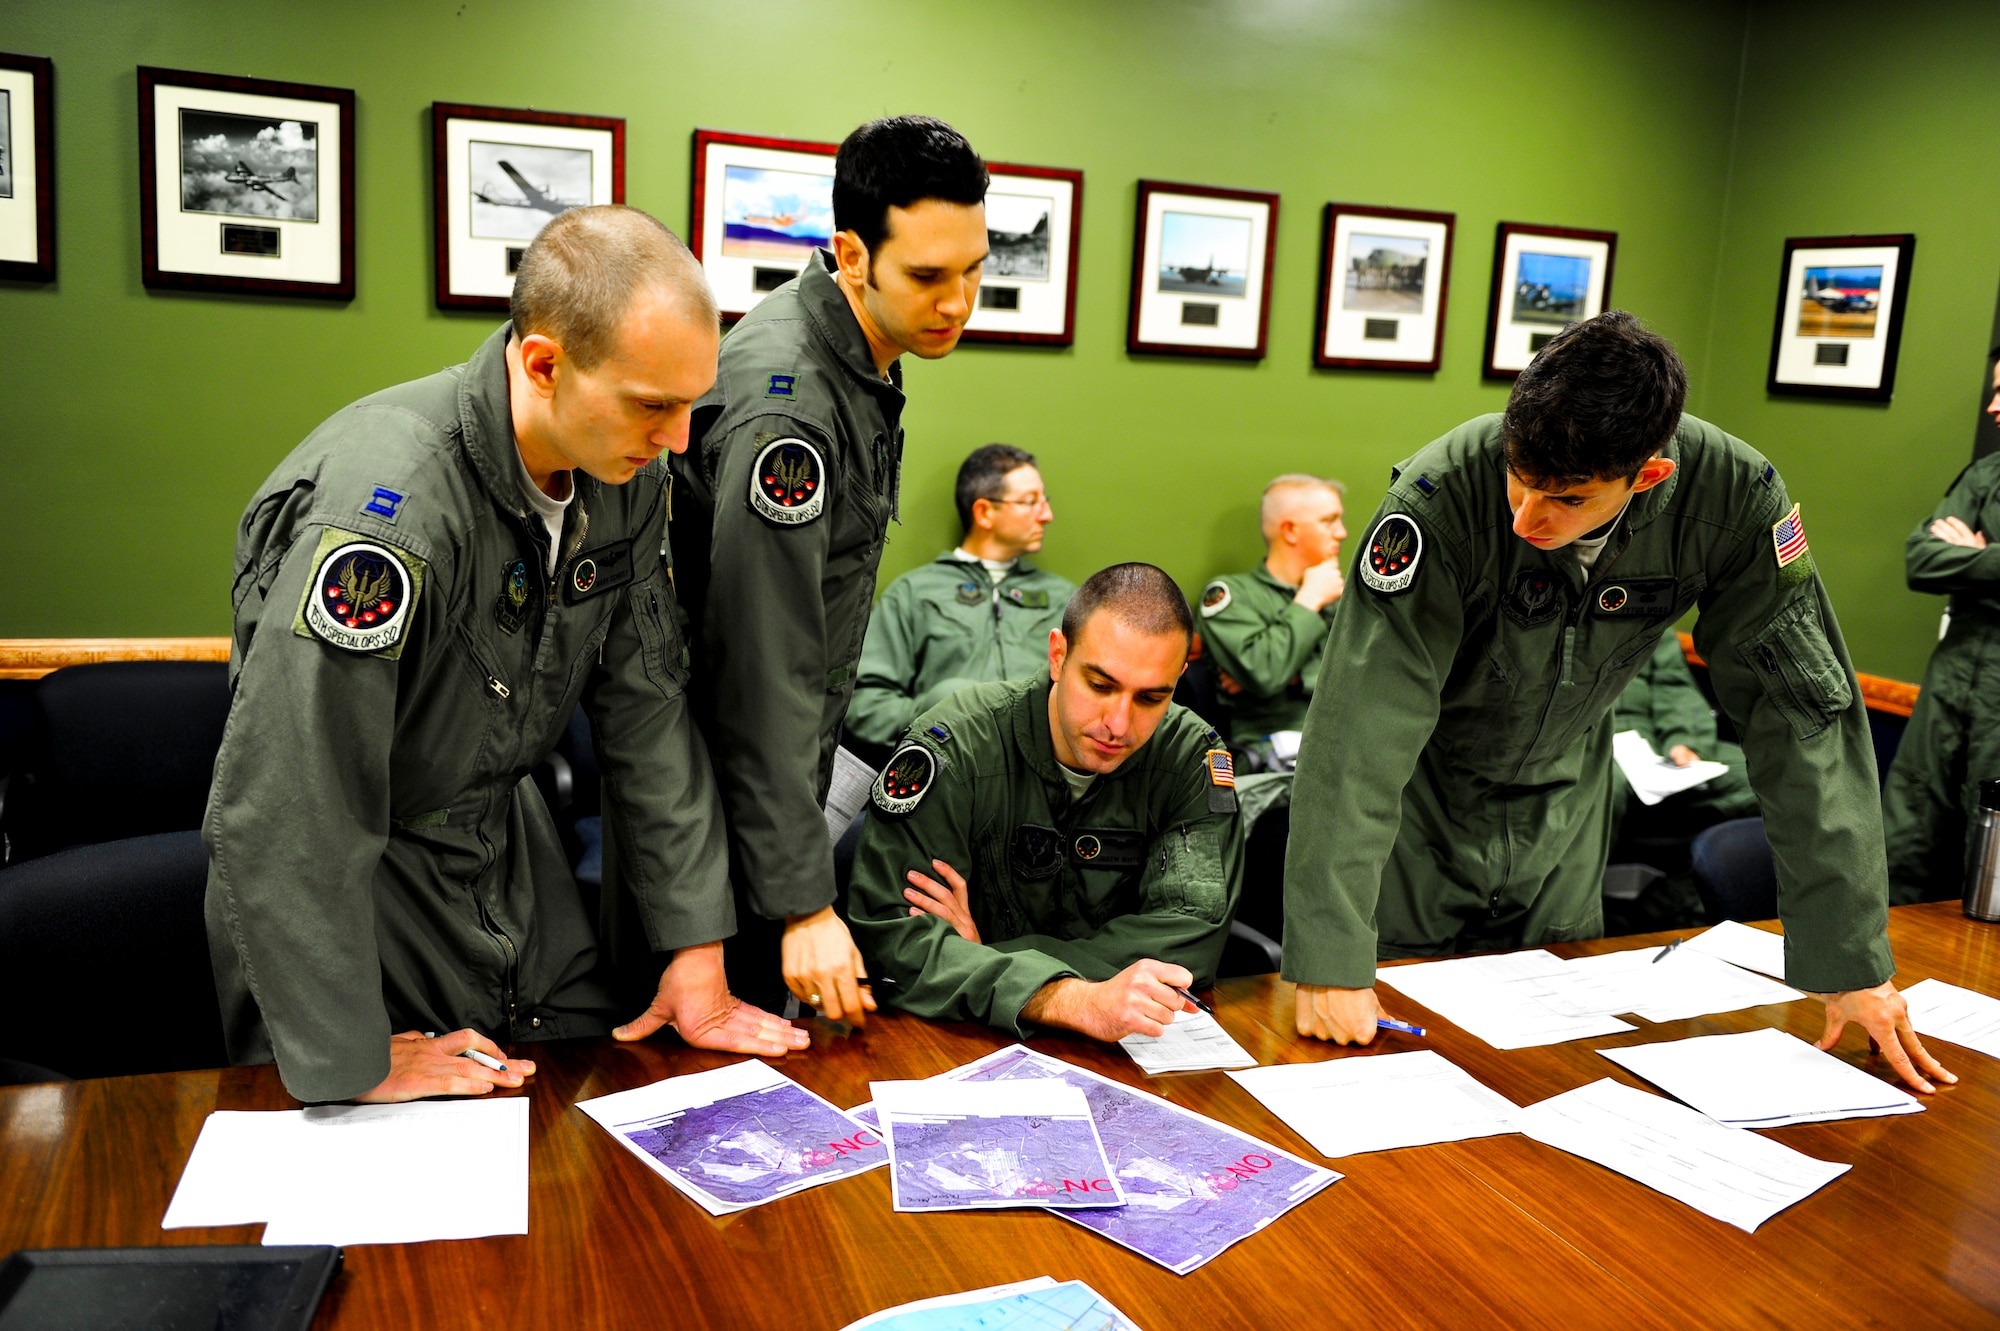 Members from the 15th Special Operations Squadron go over flight plans at Hurlburt Field, Fla., Jan. 7, 2014. The crew planned a high-altitude low-opening jump for members from the 24th Special Operations Wing. (U.S. Air Force photo/Senior Airman Christopher Callaway) 